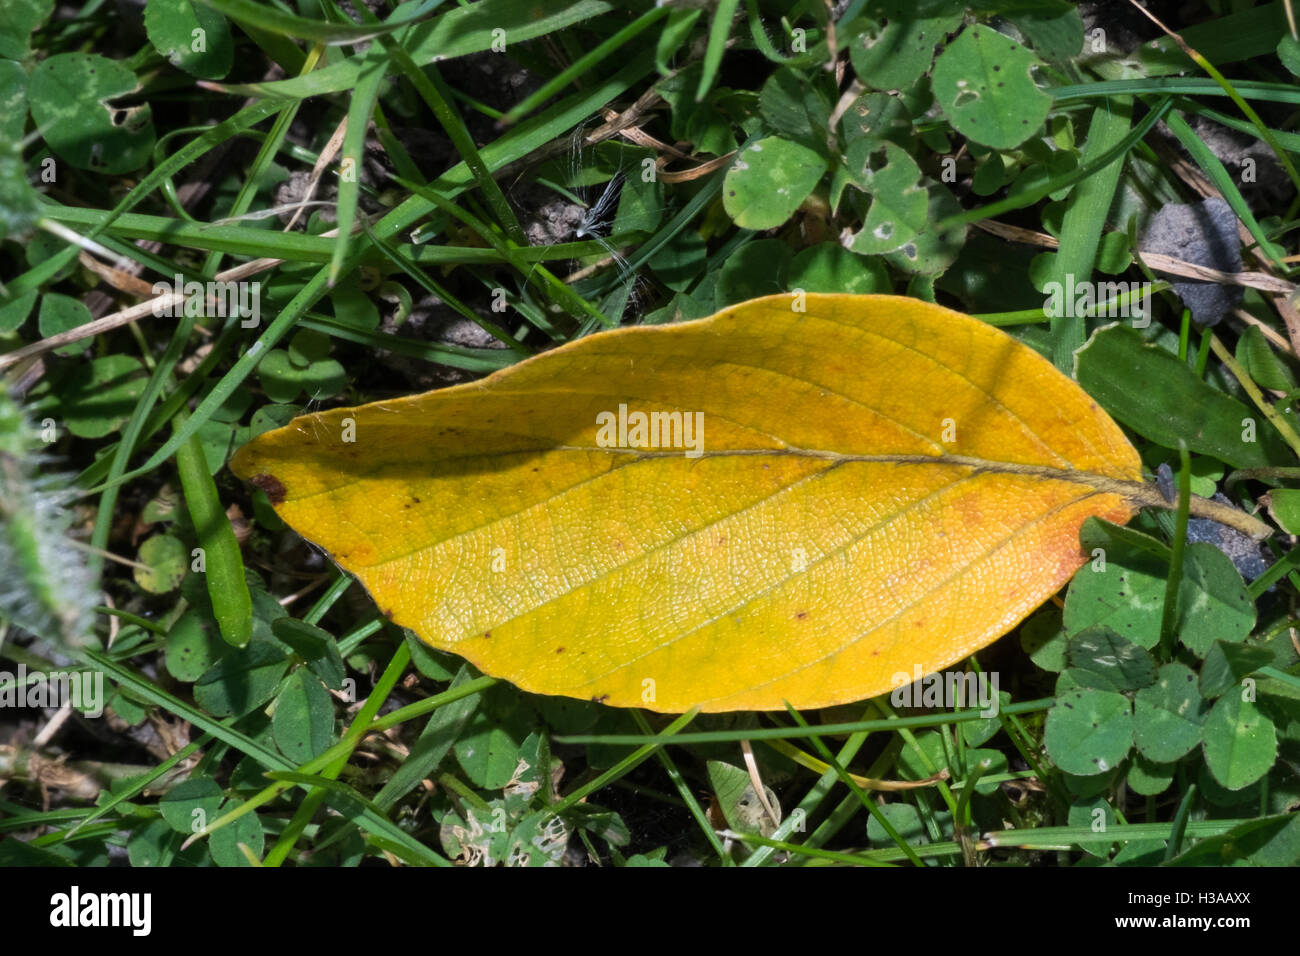 Simple yellow leaf lying on the grass Stock Photo